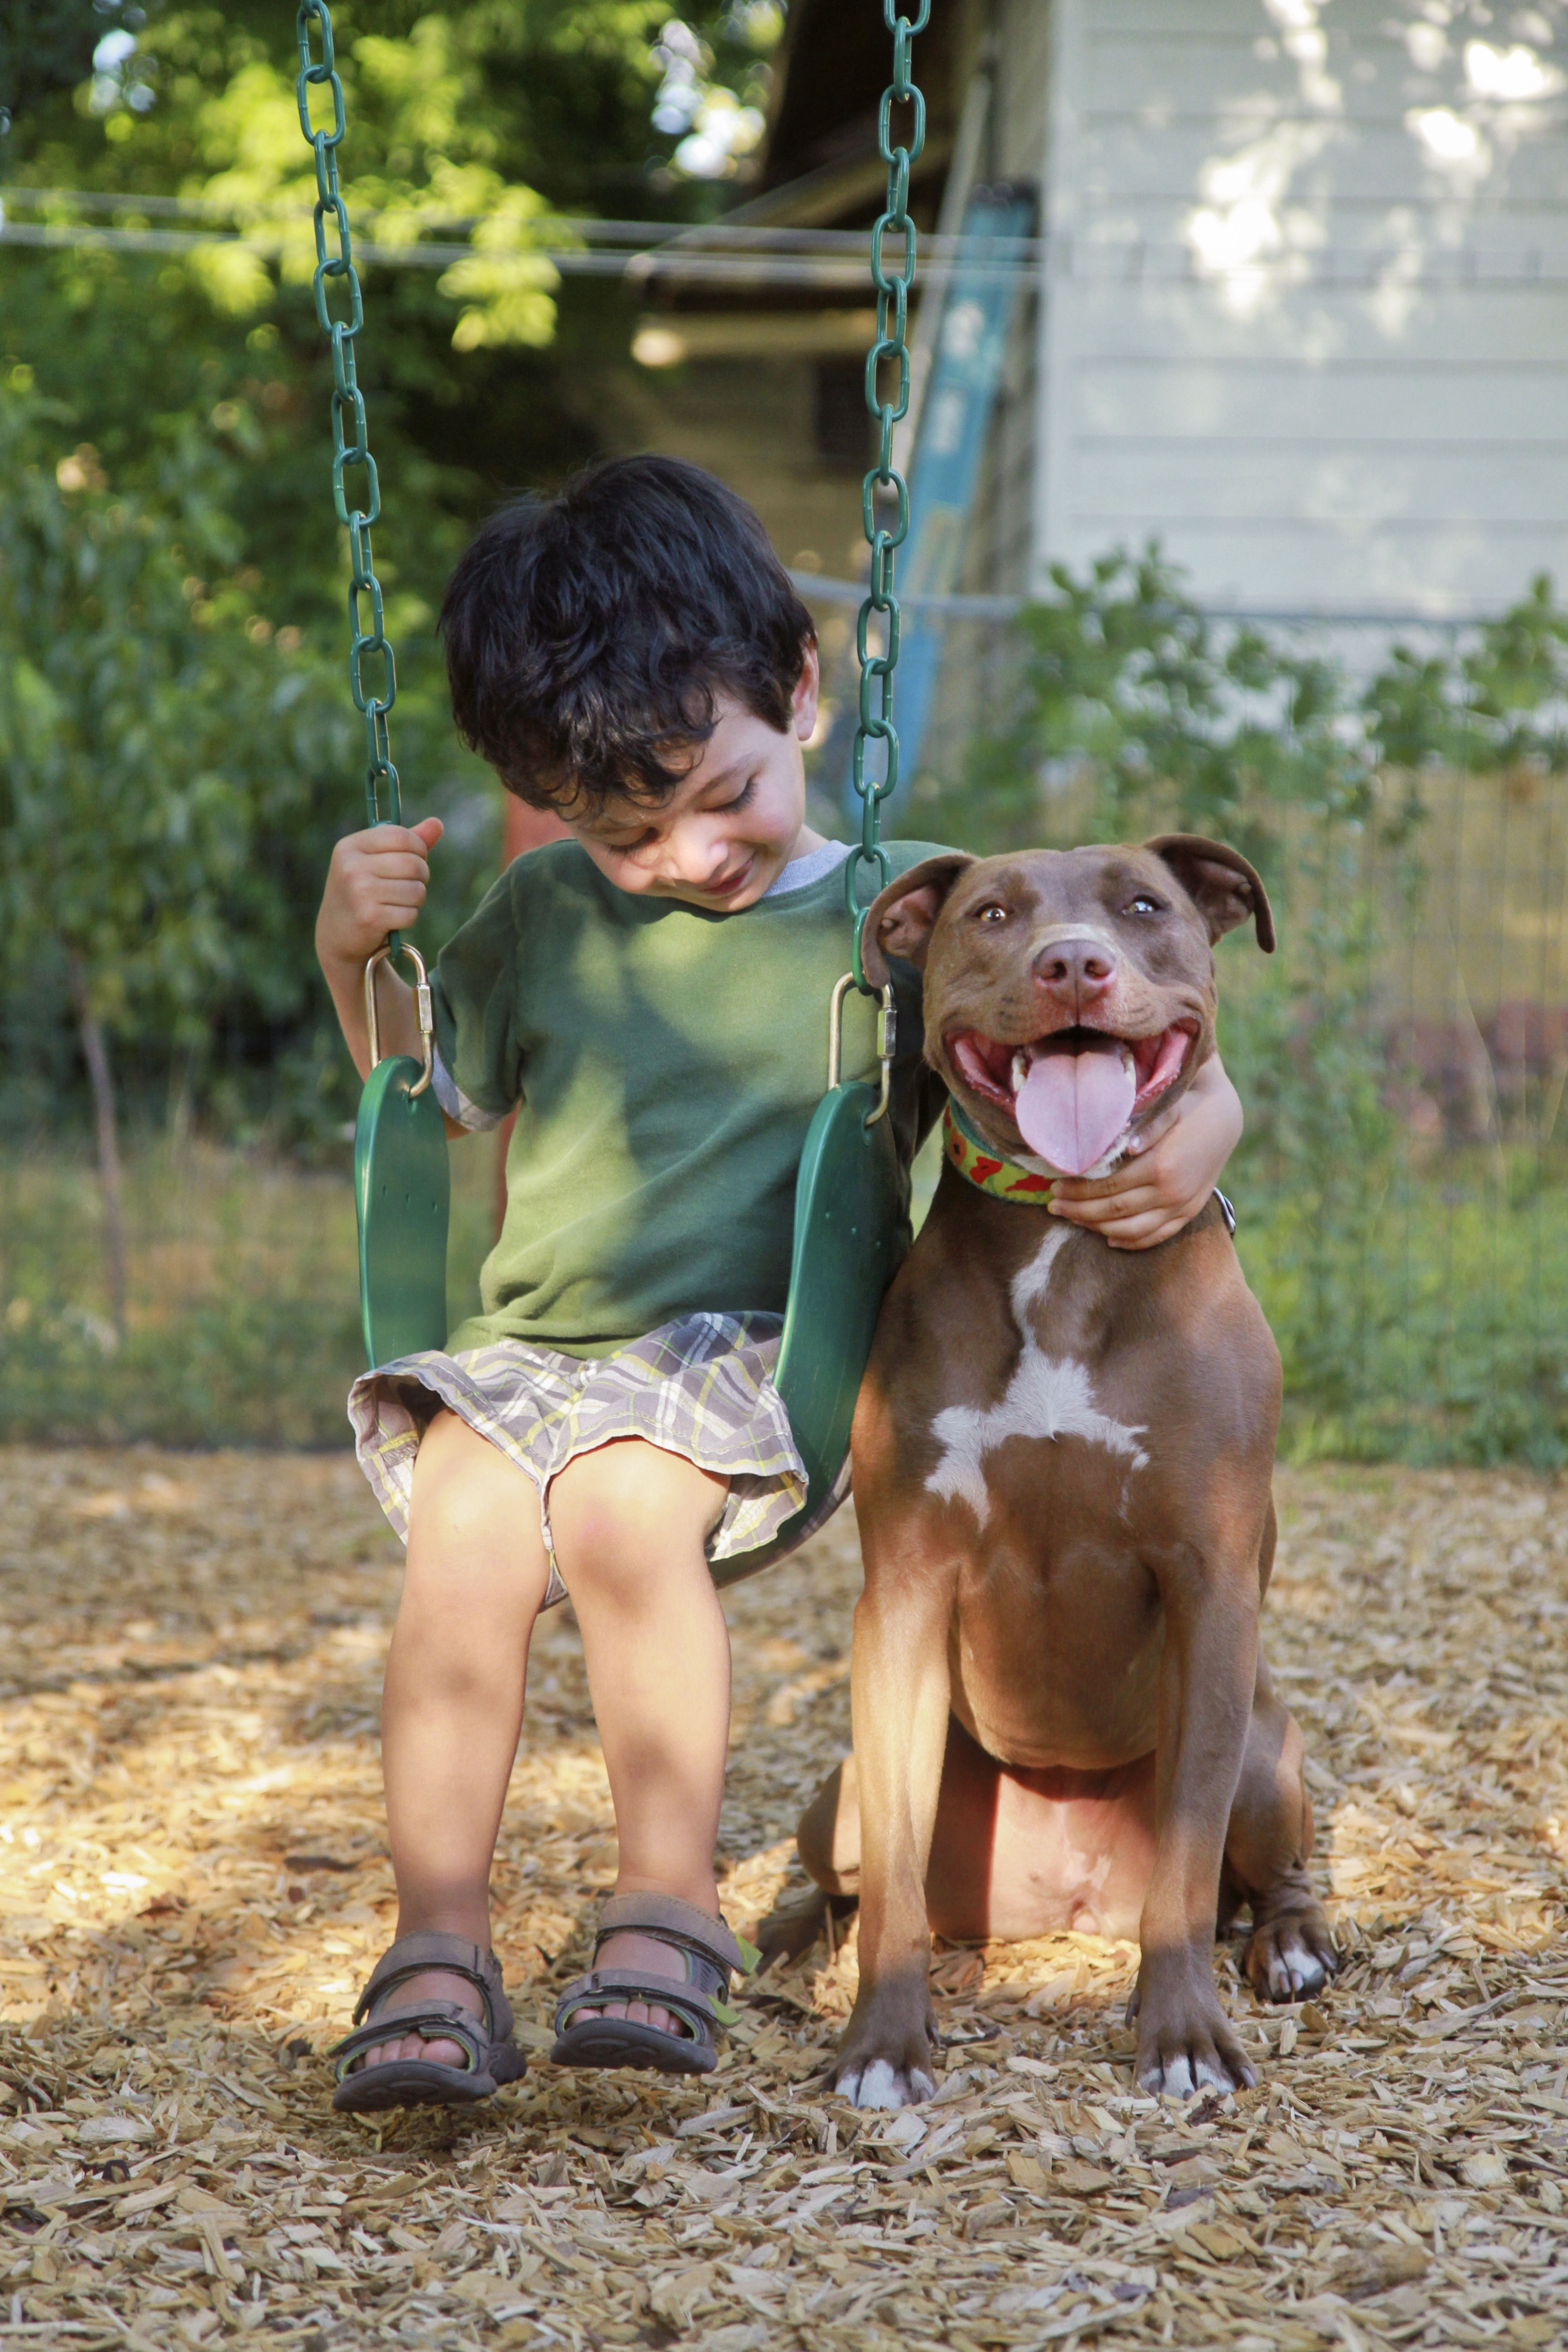 According to estimates, between five and seven million pit bulls live as family pets in the U.S.